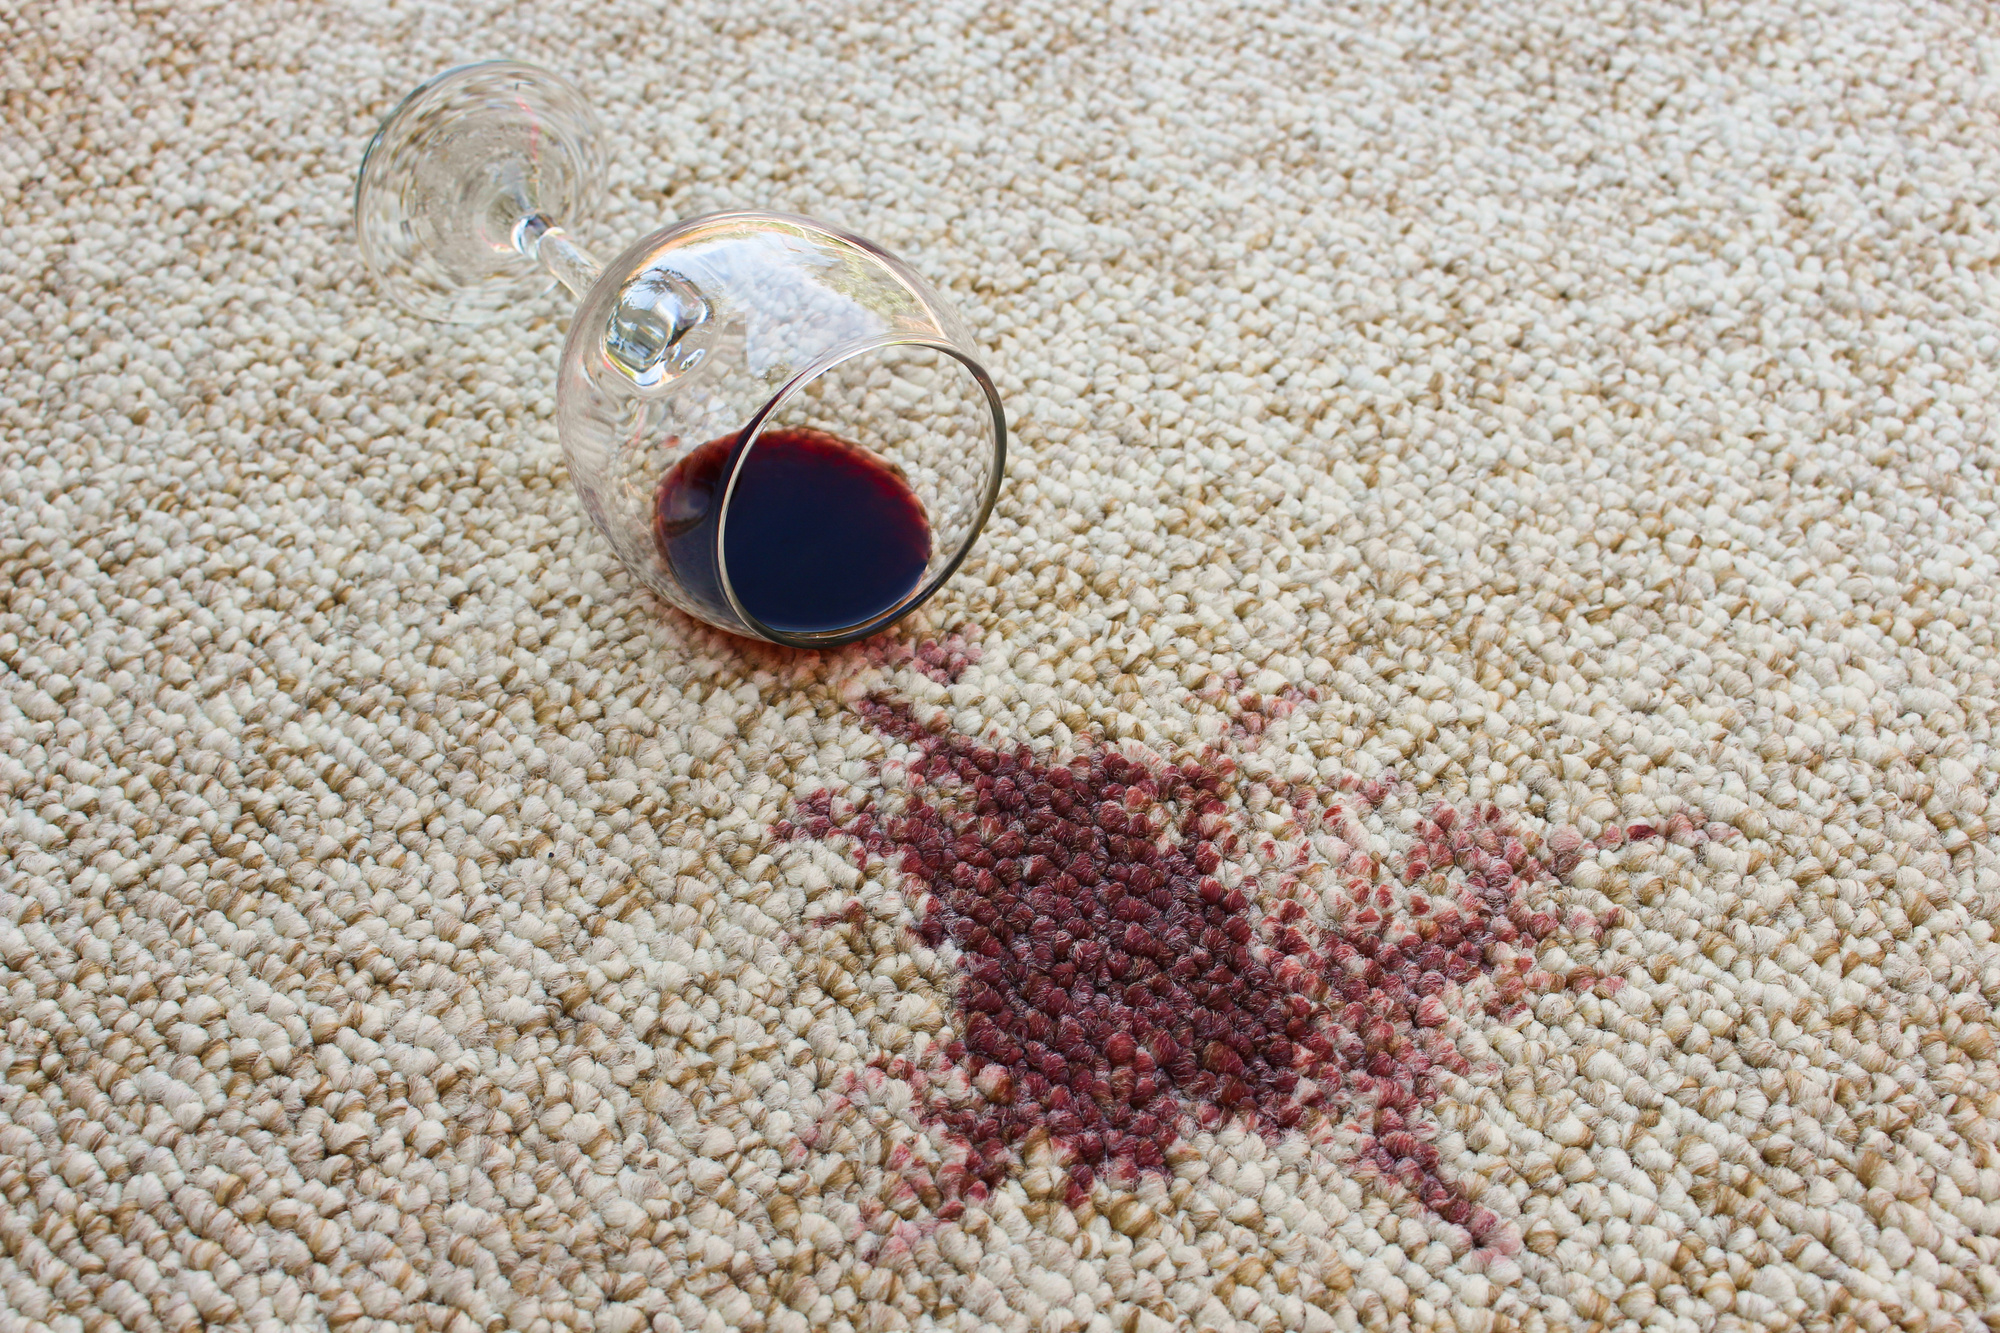 Glass of wine spilt causing wine stains on carpet